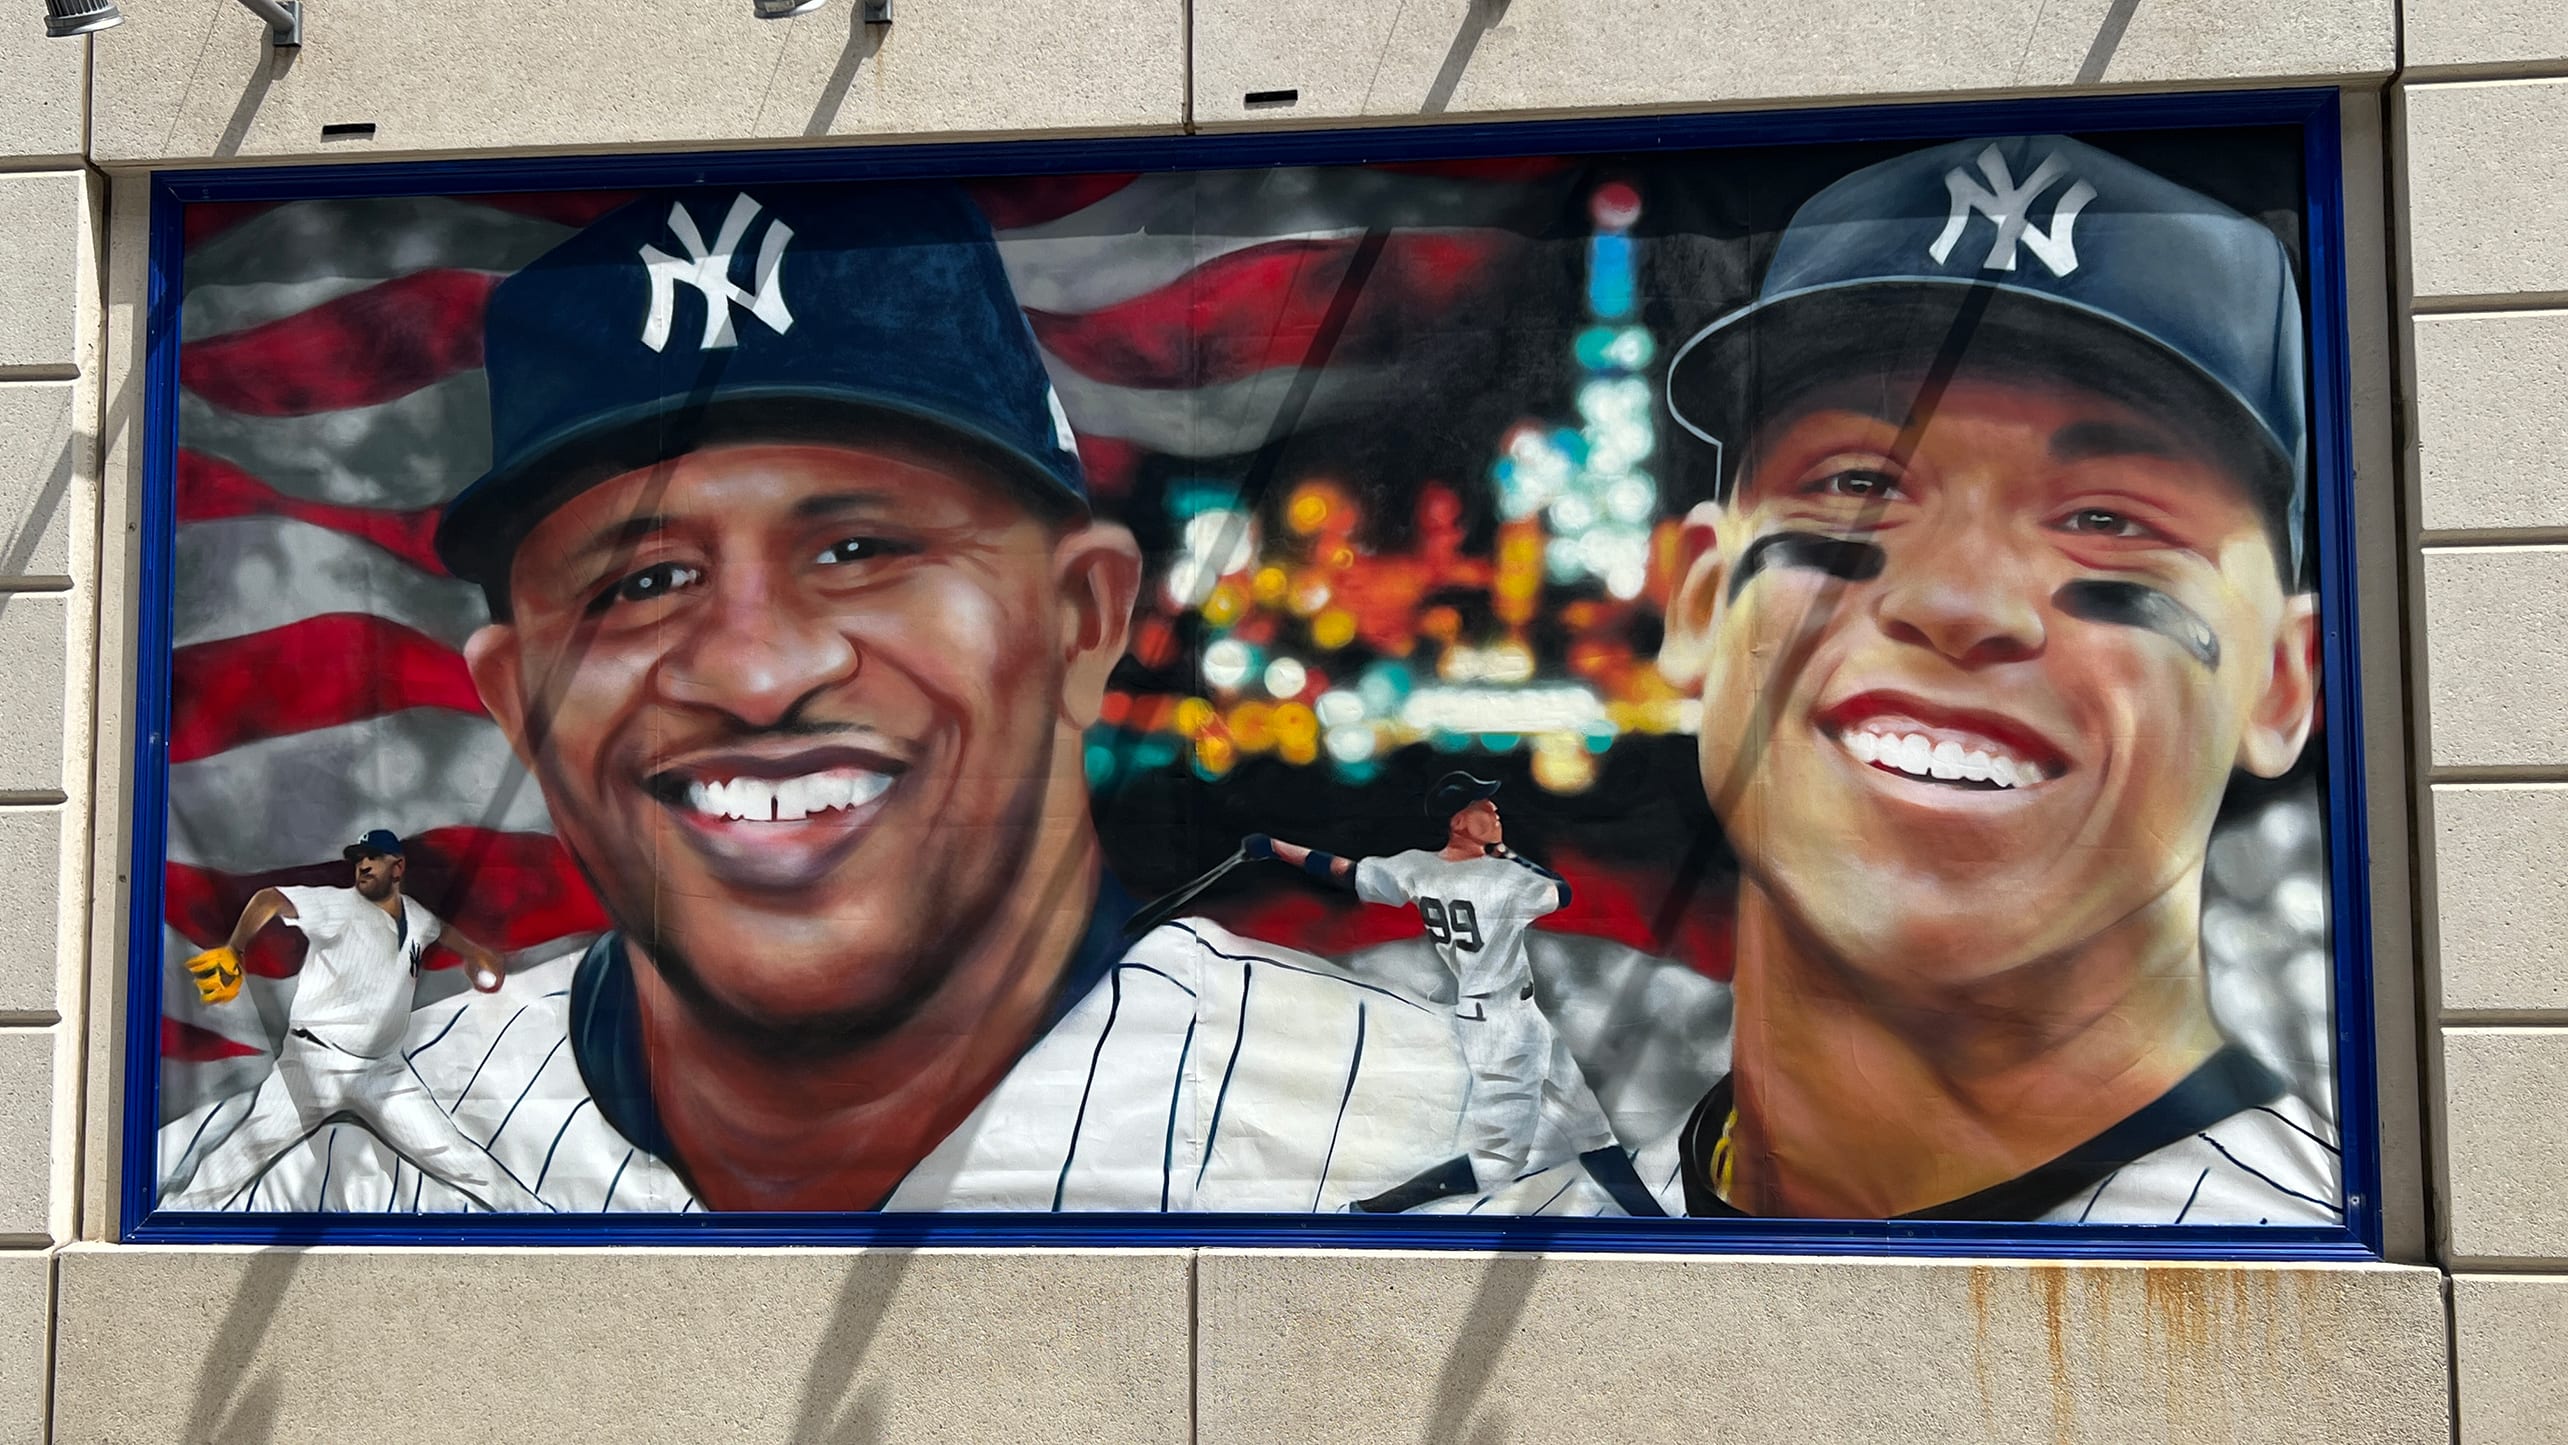 CC Sabathia and Aaron Judge are among six Yankees featured on murals in the Bronx